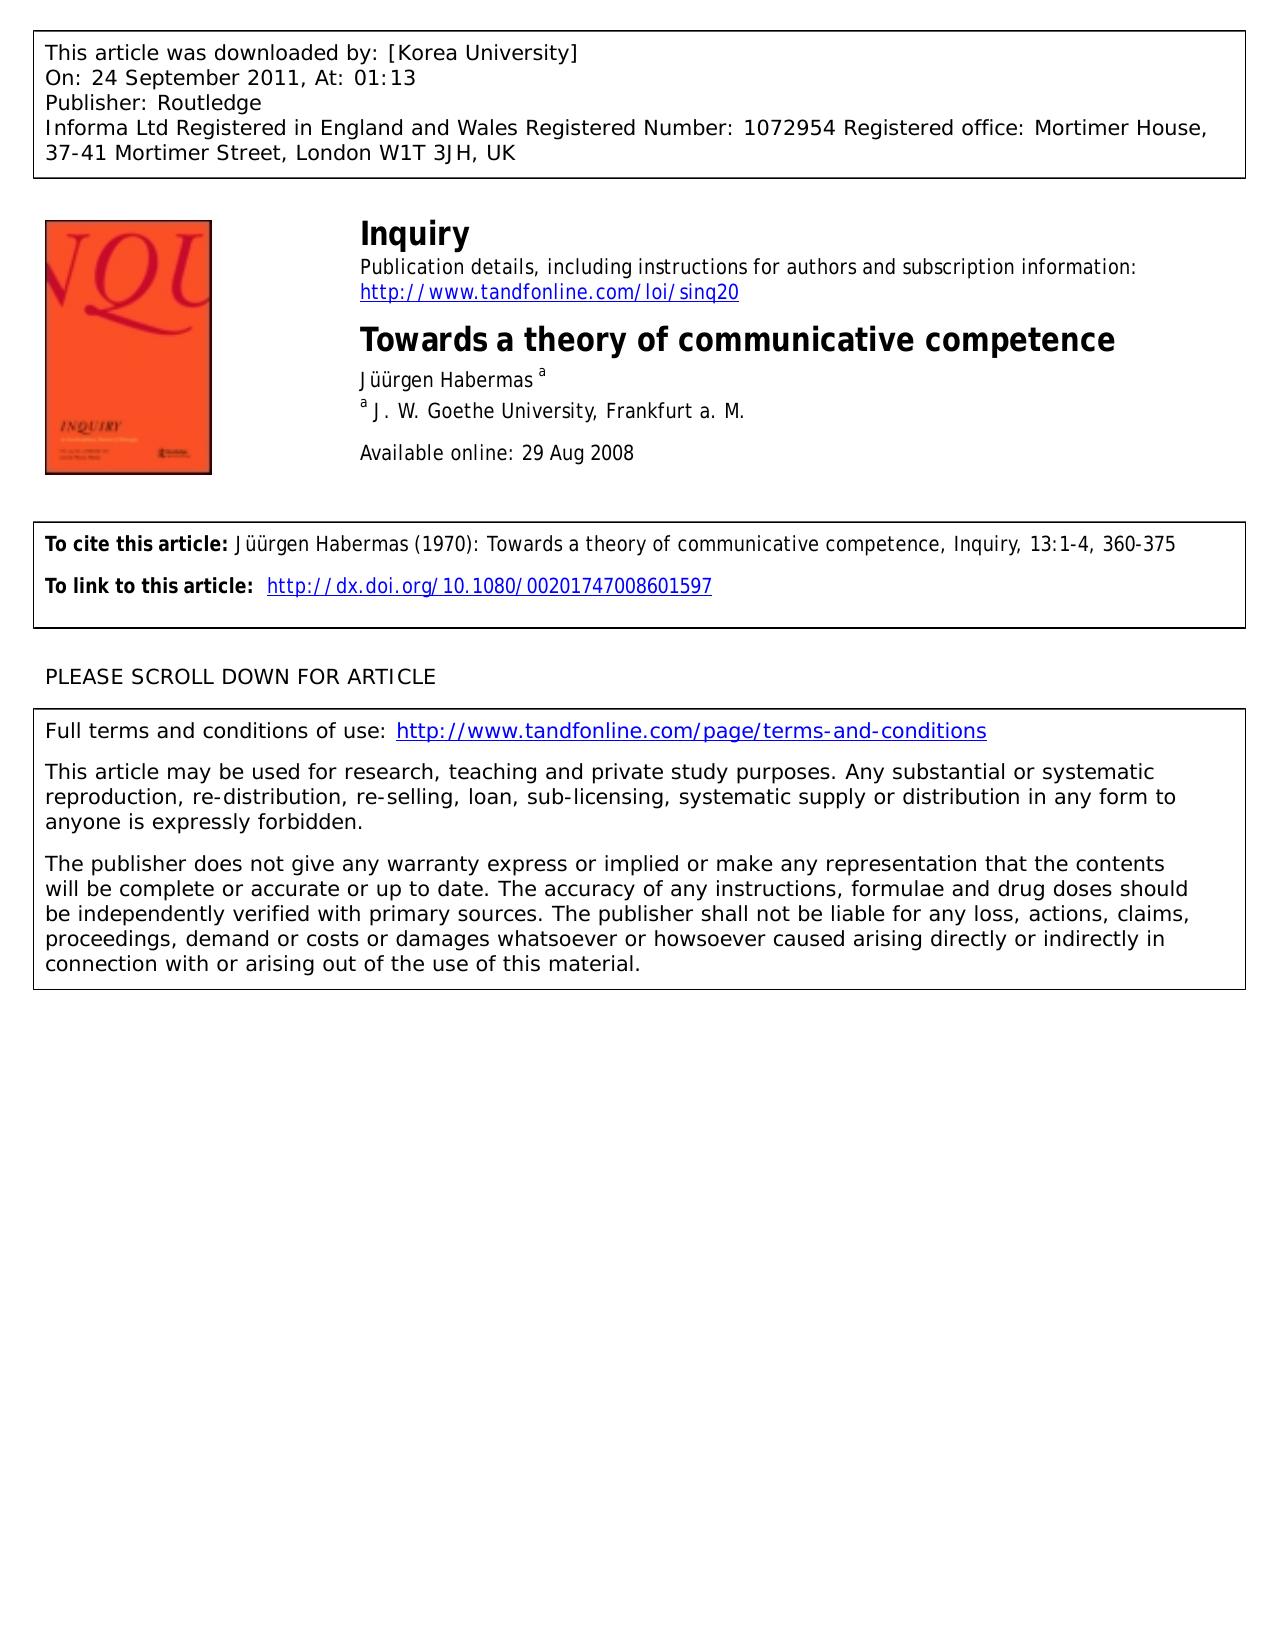 Towards a theory of communicative competence